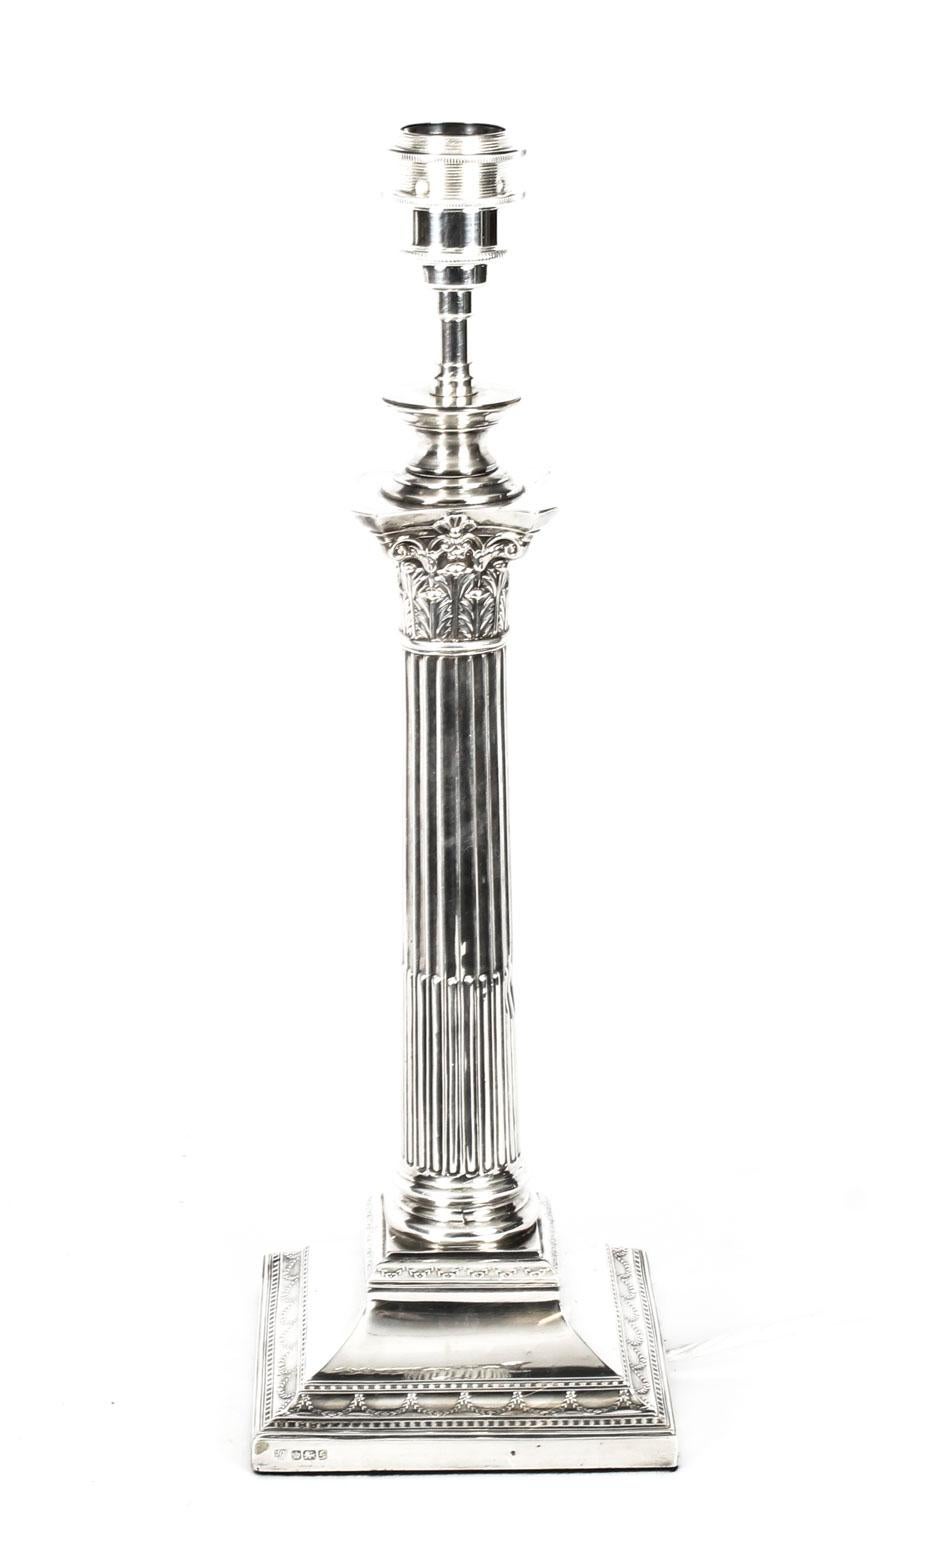 This is an impressive large antique Edwardian sterling silver Corinthian column table lamp bearing hallmarks for Sheffield 1908 and the makers mark of the renowned silversmith Hawksworth, Eyre & Co Ltd

It features a classic Corinthian Capital